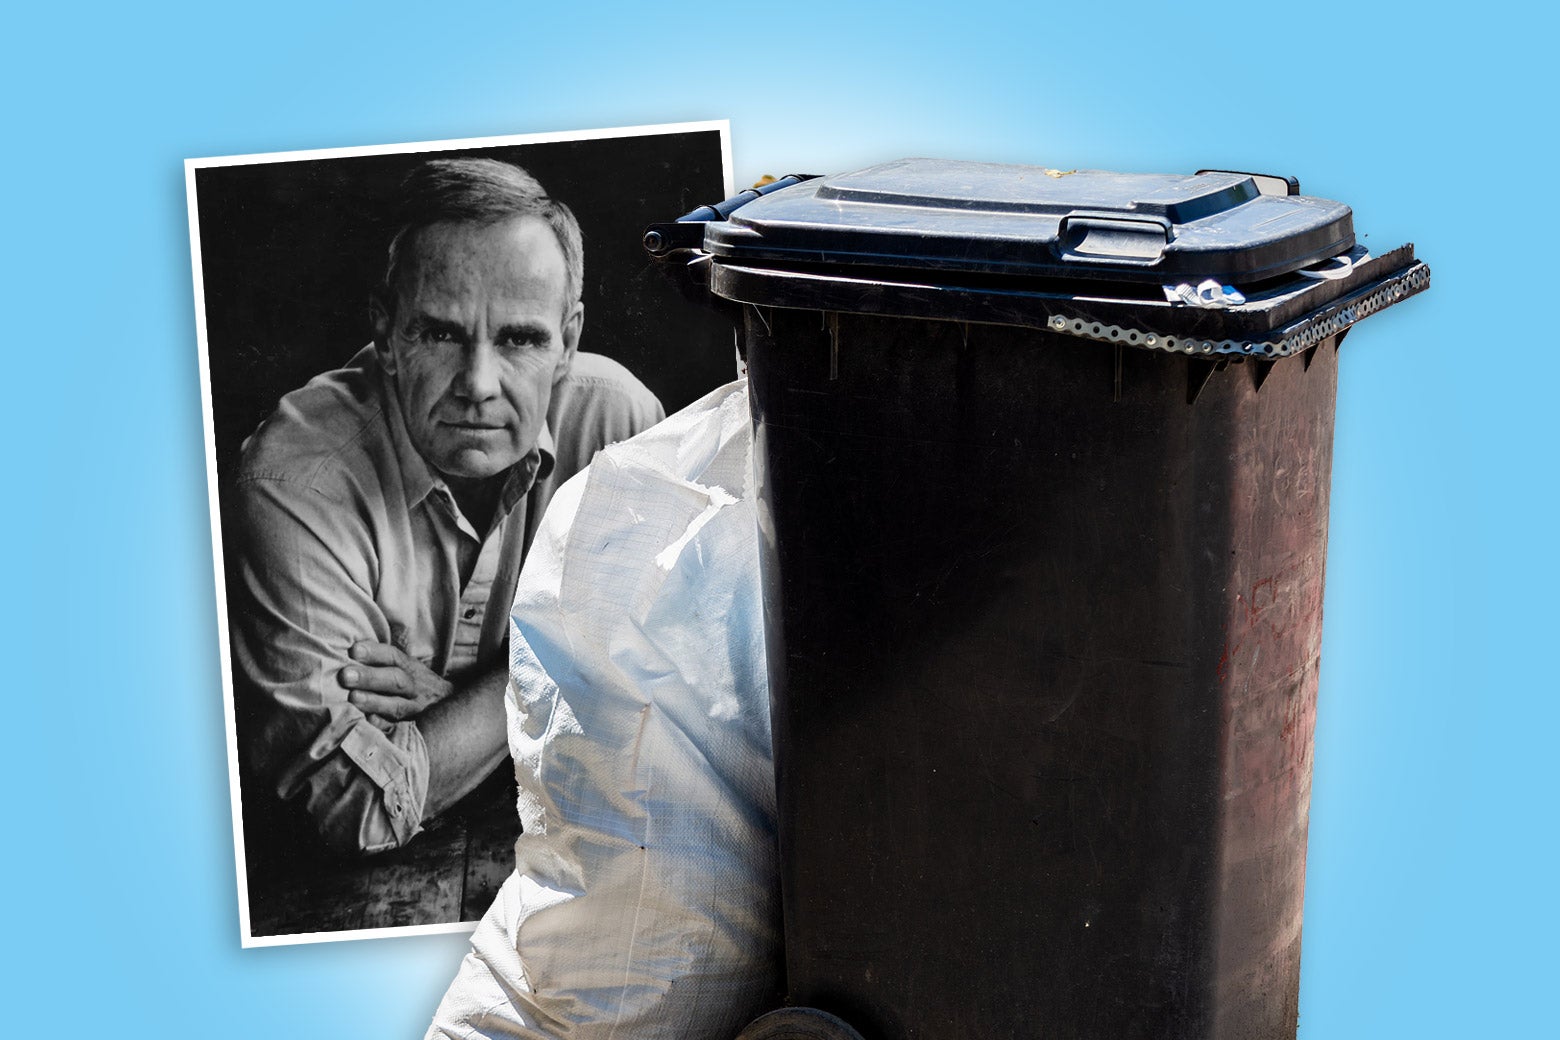 The author Cormac McCarthy, and a trash bin.